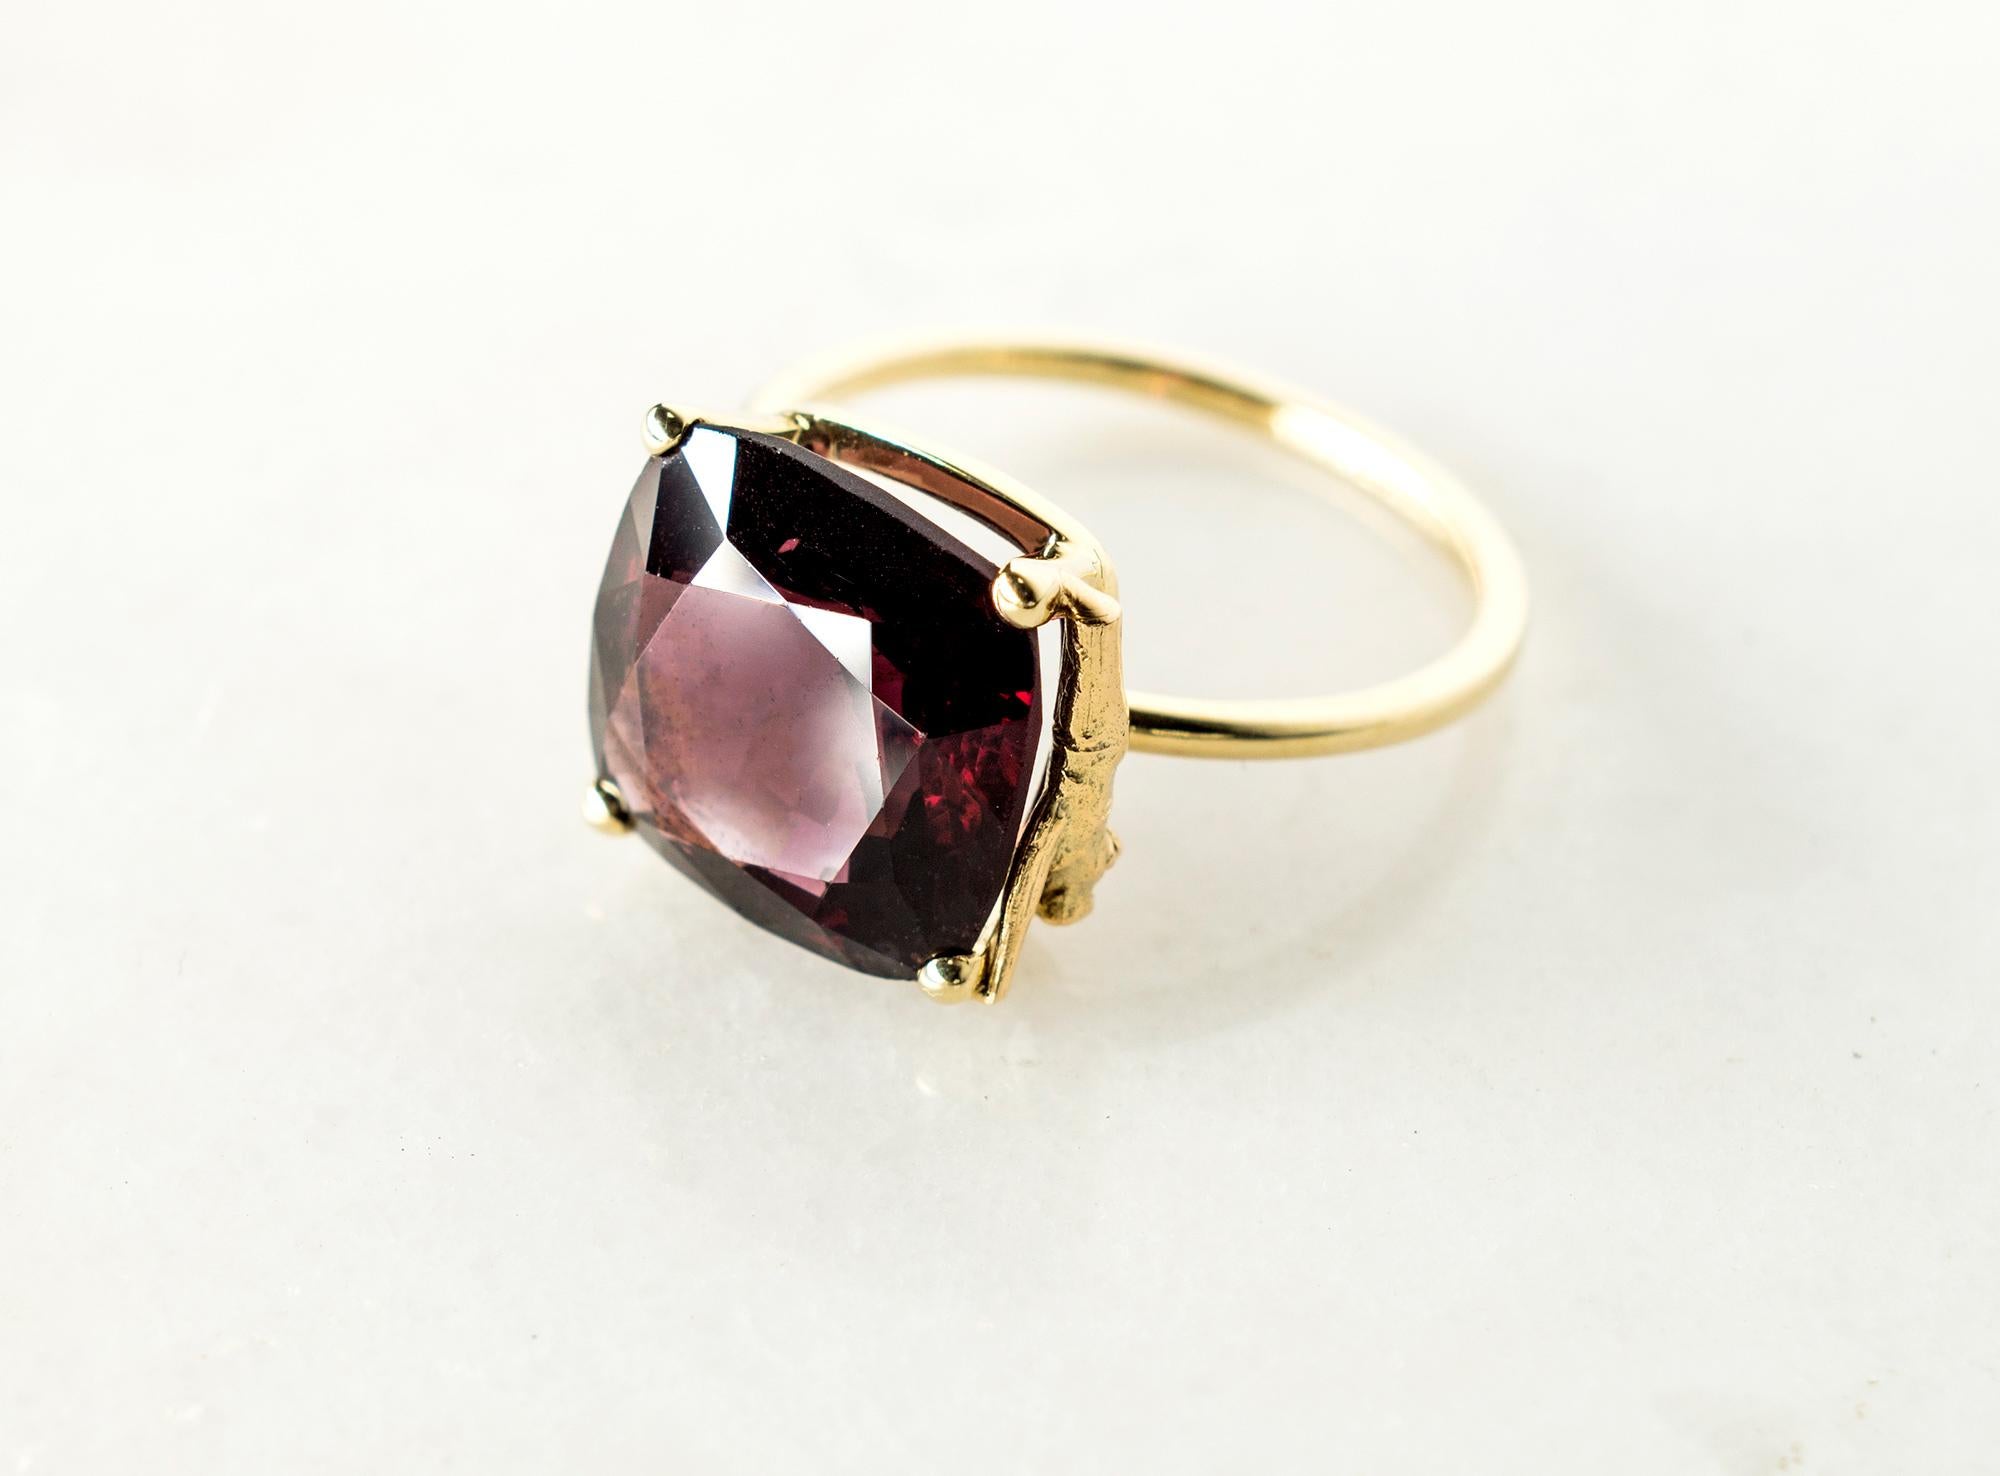 This contemporary ring is in 14 karat yellow gold with red unheated certified natural cushion spinel from Burma, 5.38 carats. It belongs to Tea collection, which was featured in Vogue UA. The size of the ring is 5.5 US (16).

The ring is easy to